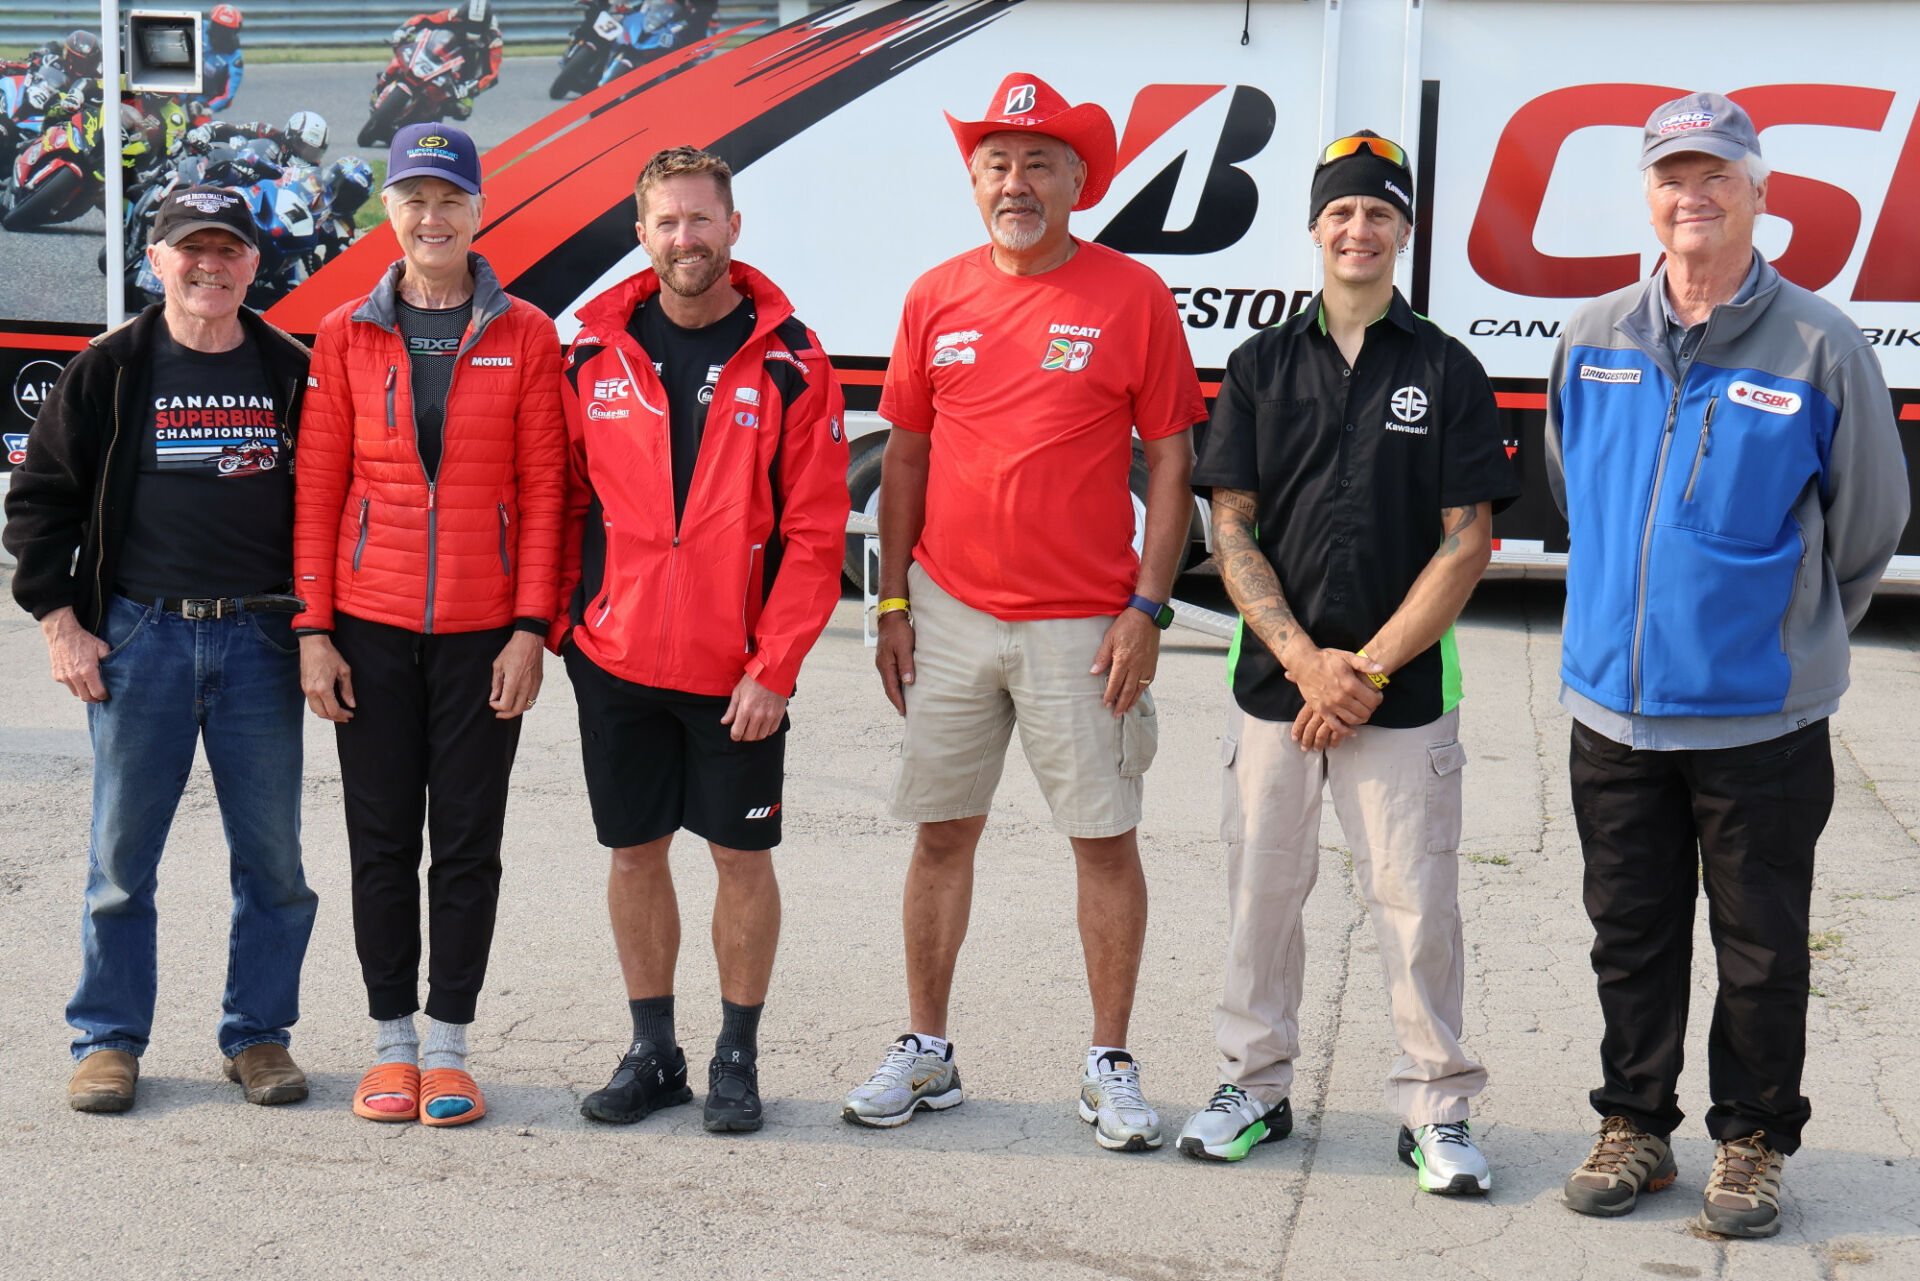 Canadian Motorcycle Hall of Fame members at the Bridgestone CSBK event in Grand Bend (from left): Gary McKinnon (Class of 2016), Toni Sharpless (2011), Steve Beattie (2017), Clive Ng-A-Kien (2019), and 2023 CSBK inductees, 14-time CSBK Champion Jordan Szoke and CSBK founder Colin Fraser. Photo by Rob O'Brien, courtesy CSBK.